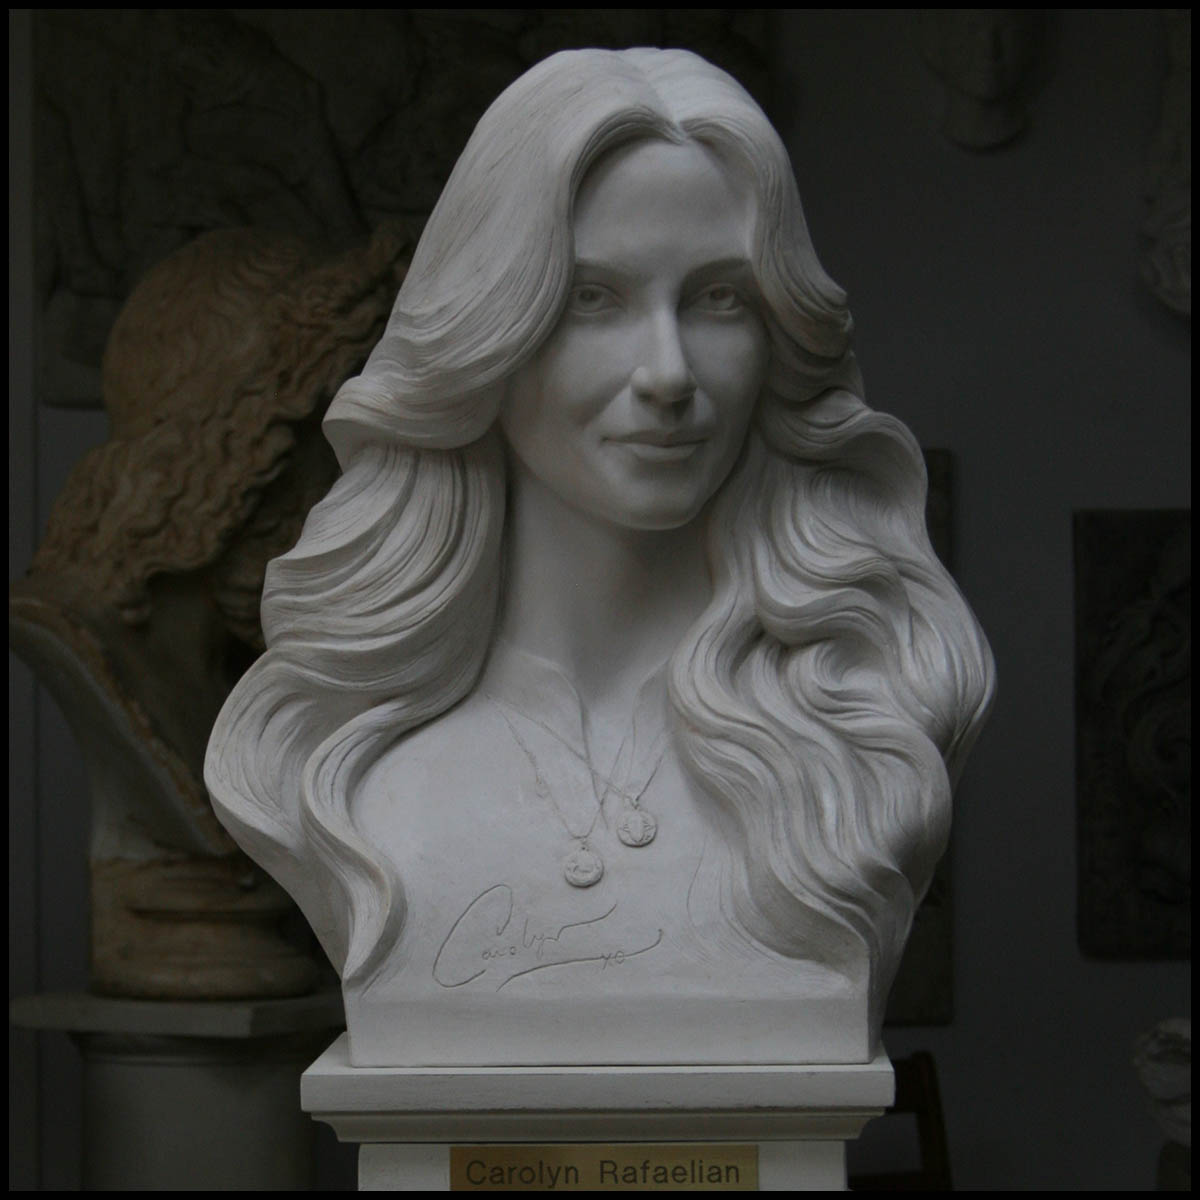 photo of white-colored sculpture bust of Carolyn Rafaelian on white square base with small gold-colored plaque against a black background